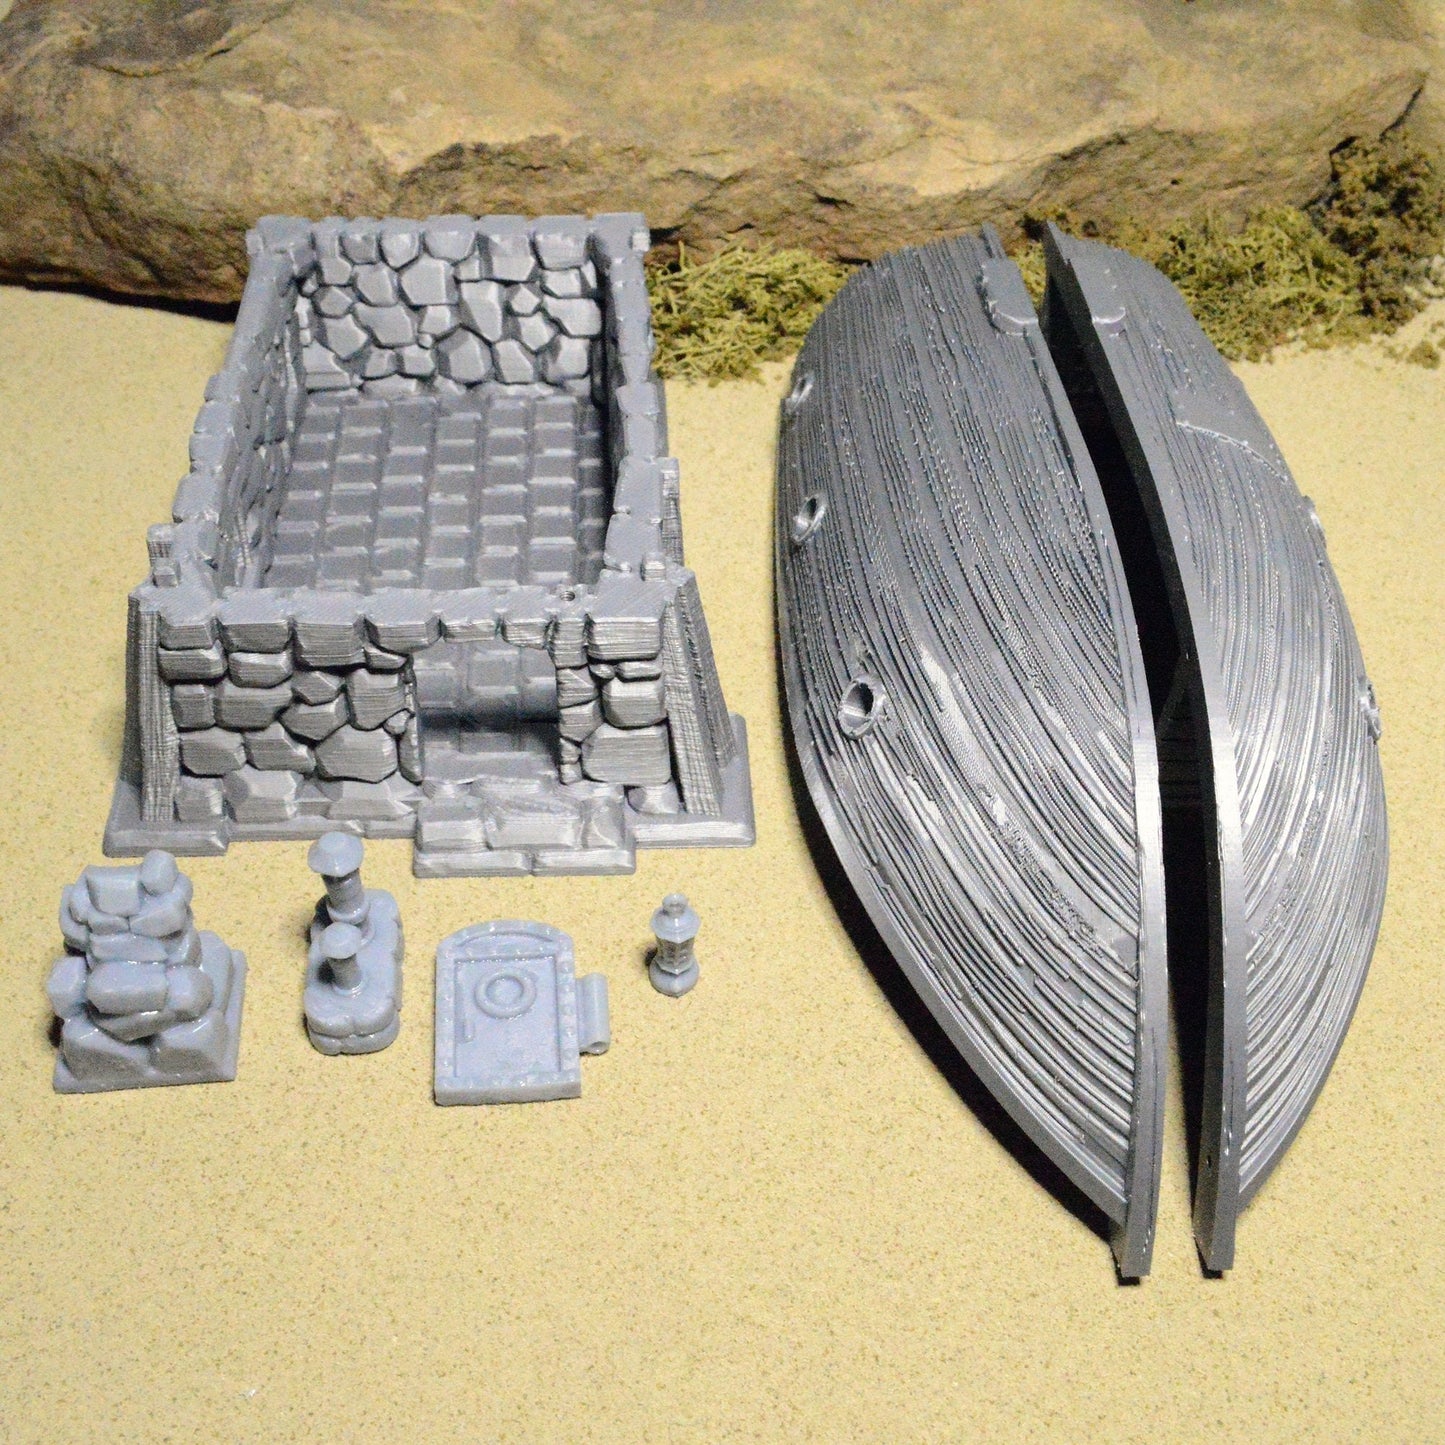 Boat House 15mm 28mm for D&D Terrain, DnD Pathfinder Pirate Coastal Boathouse